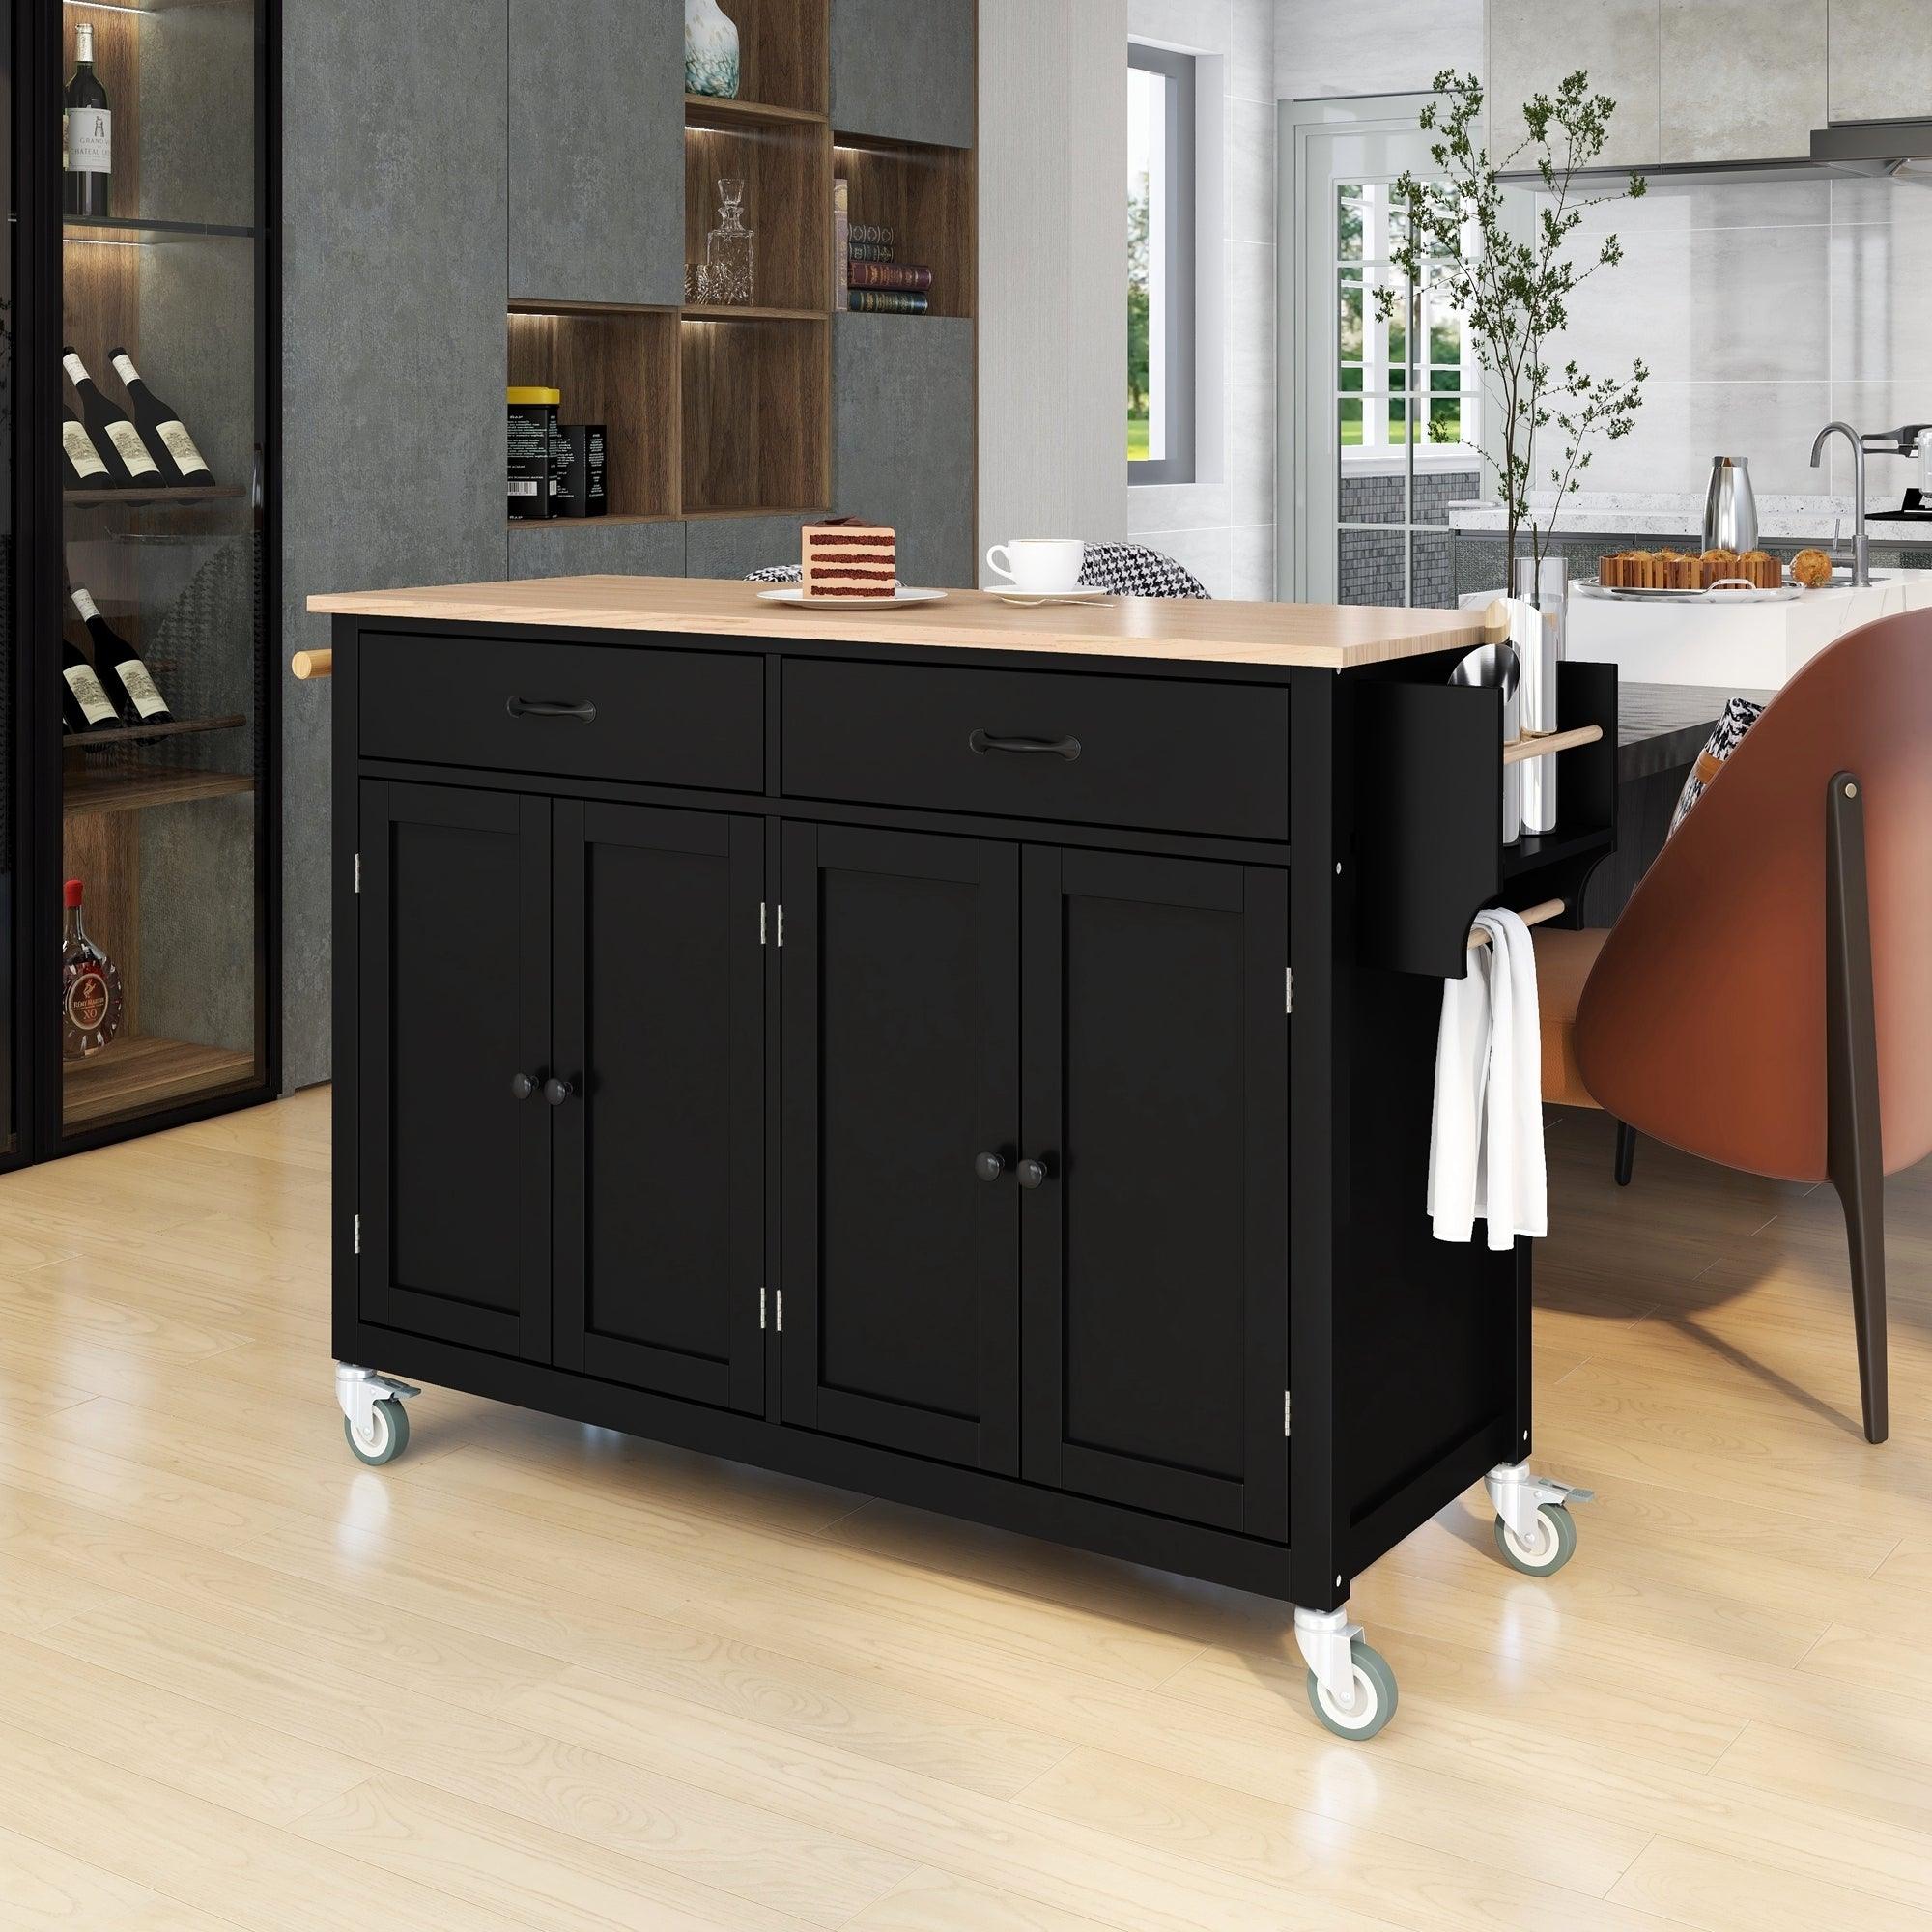 🆓🚛 Kitchen Island Cart With Solid Wood Top & Locking Wheels, 54.3 Inch Width, 4 Door Cabinet & Two Drawers, Spice Rack, Towel Rack (Black)